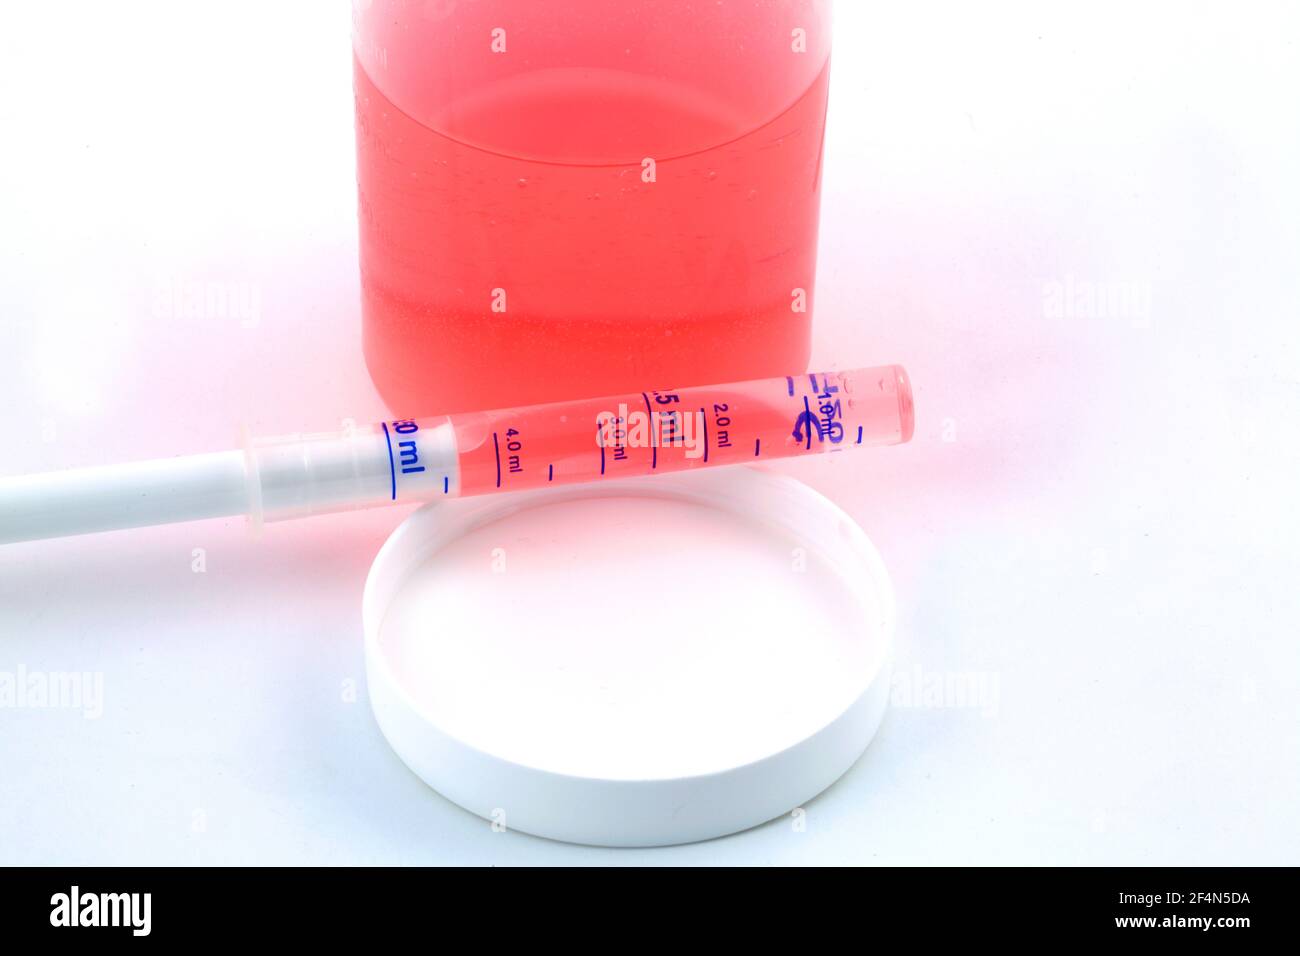 Closeup of medicine syrup in a syringe without needle on a white backgroun Stock Photo